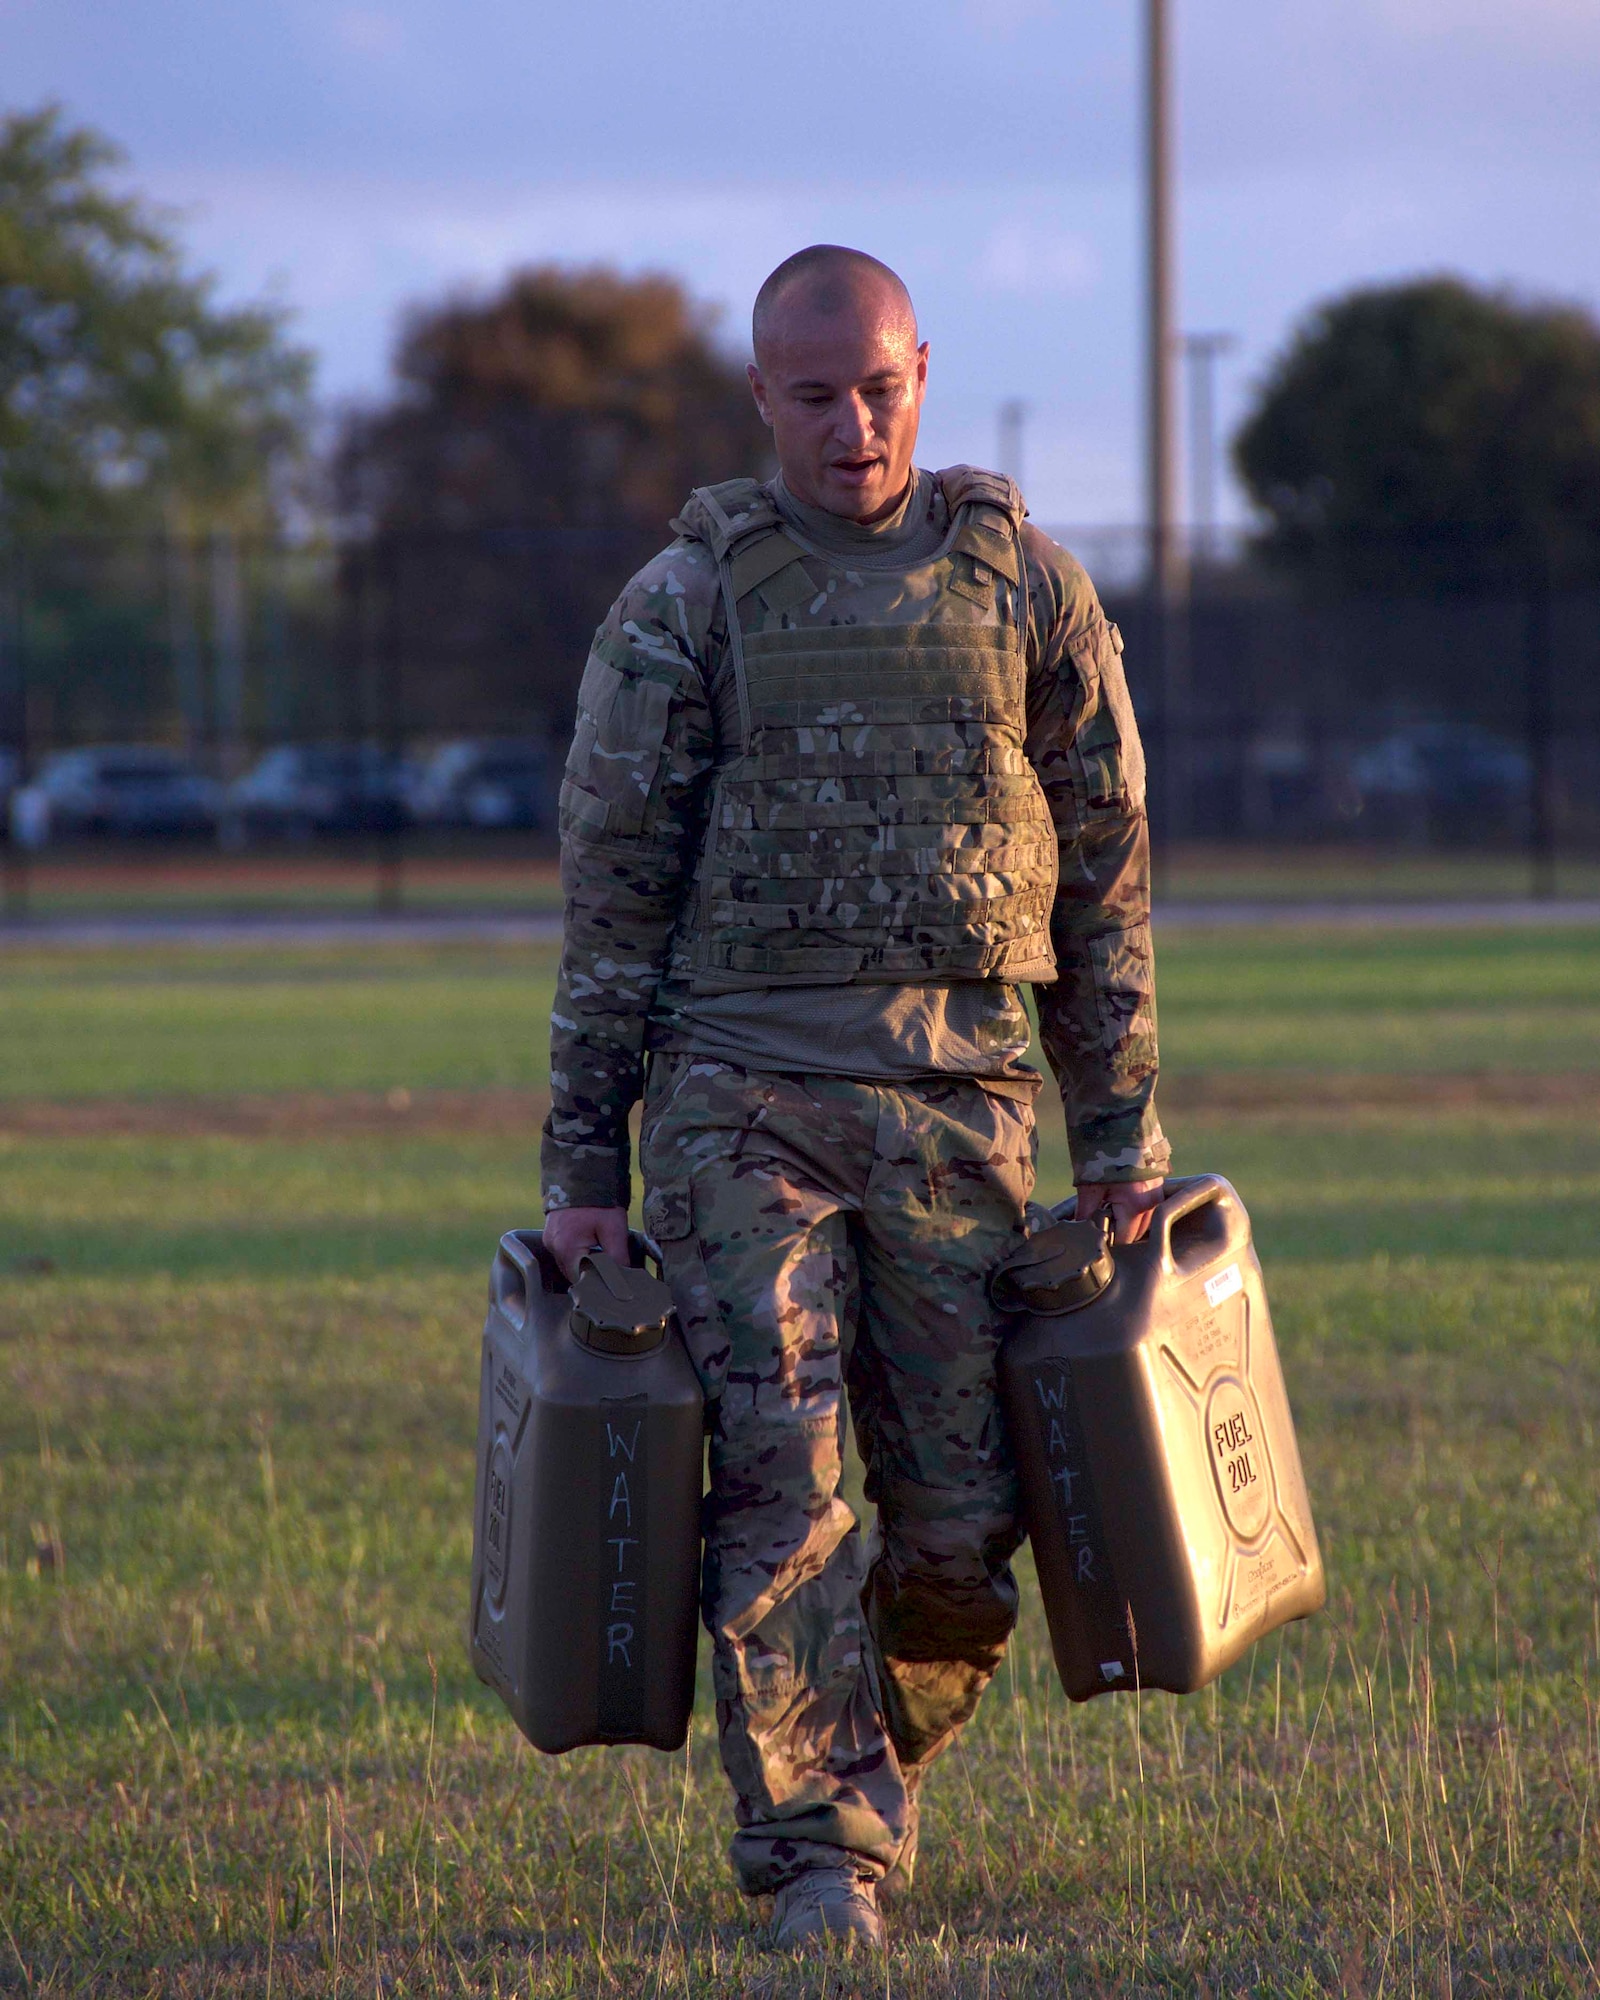 Senior Master Sgt. William Williams, 482nd Civil Engineering Squadron Explosive Ordnance Disposal Flight program manager, carries approximately 80 pounds of water 100 meters during a Task Oriented Physical Exercise at Homestead Air Reserve Base, Fla., April 6. The TOPE was conducted during a weeklong training exercise aimed to prepare the reservists for combat operations. (U.S. Air Force photo by Staff Sgt. Jaimi L. Upthegrove)